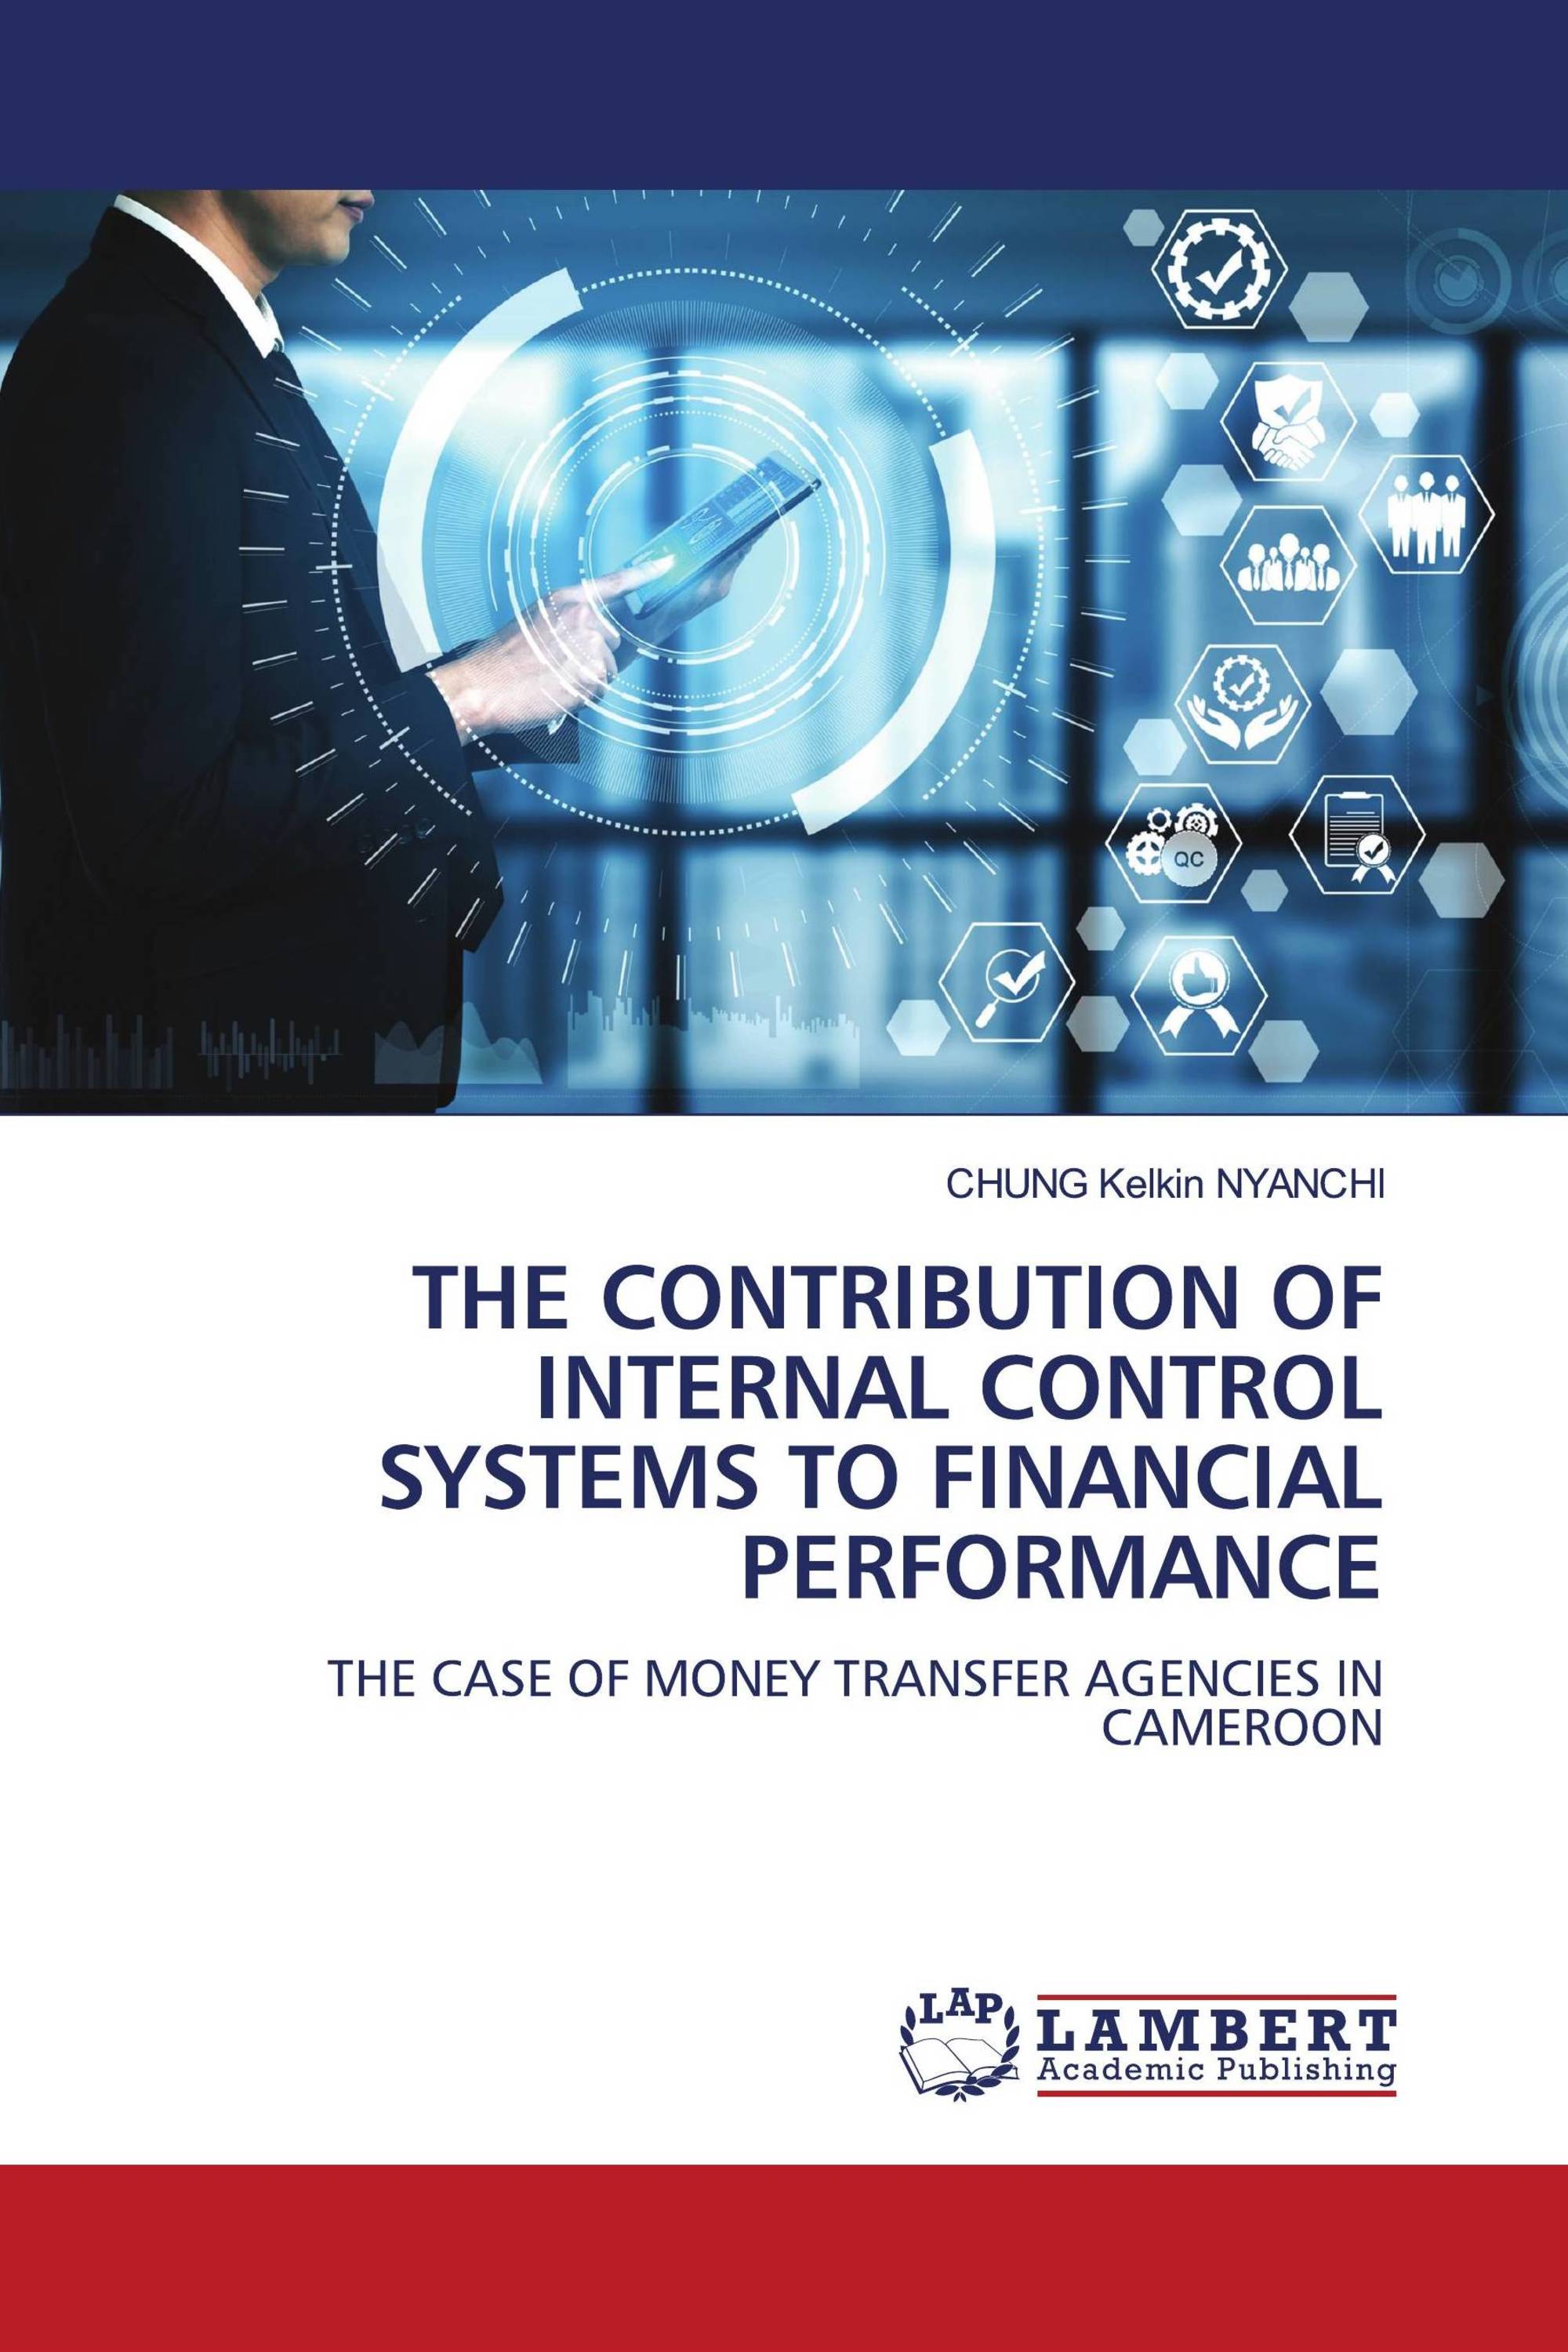 THE CONTRIBUTION OF INTERNAL CONTROL SYSTEMS TO FINANCIAL PERFORMANCE